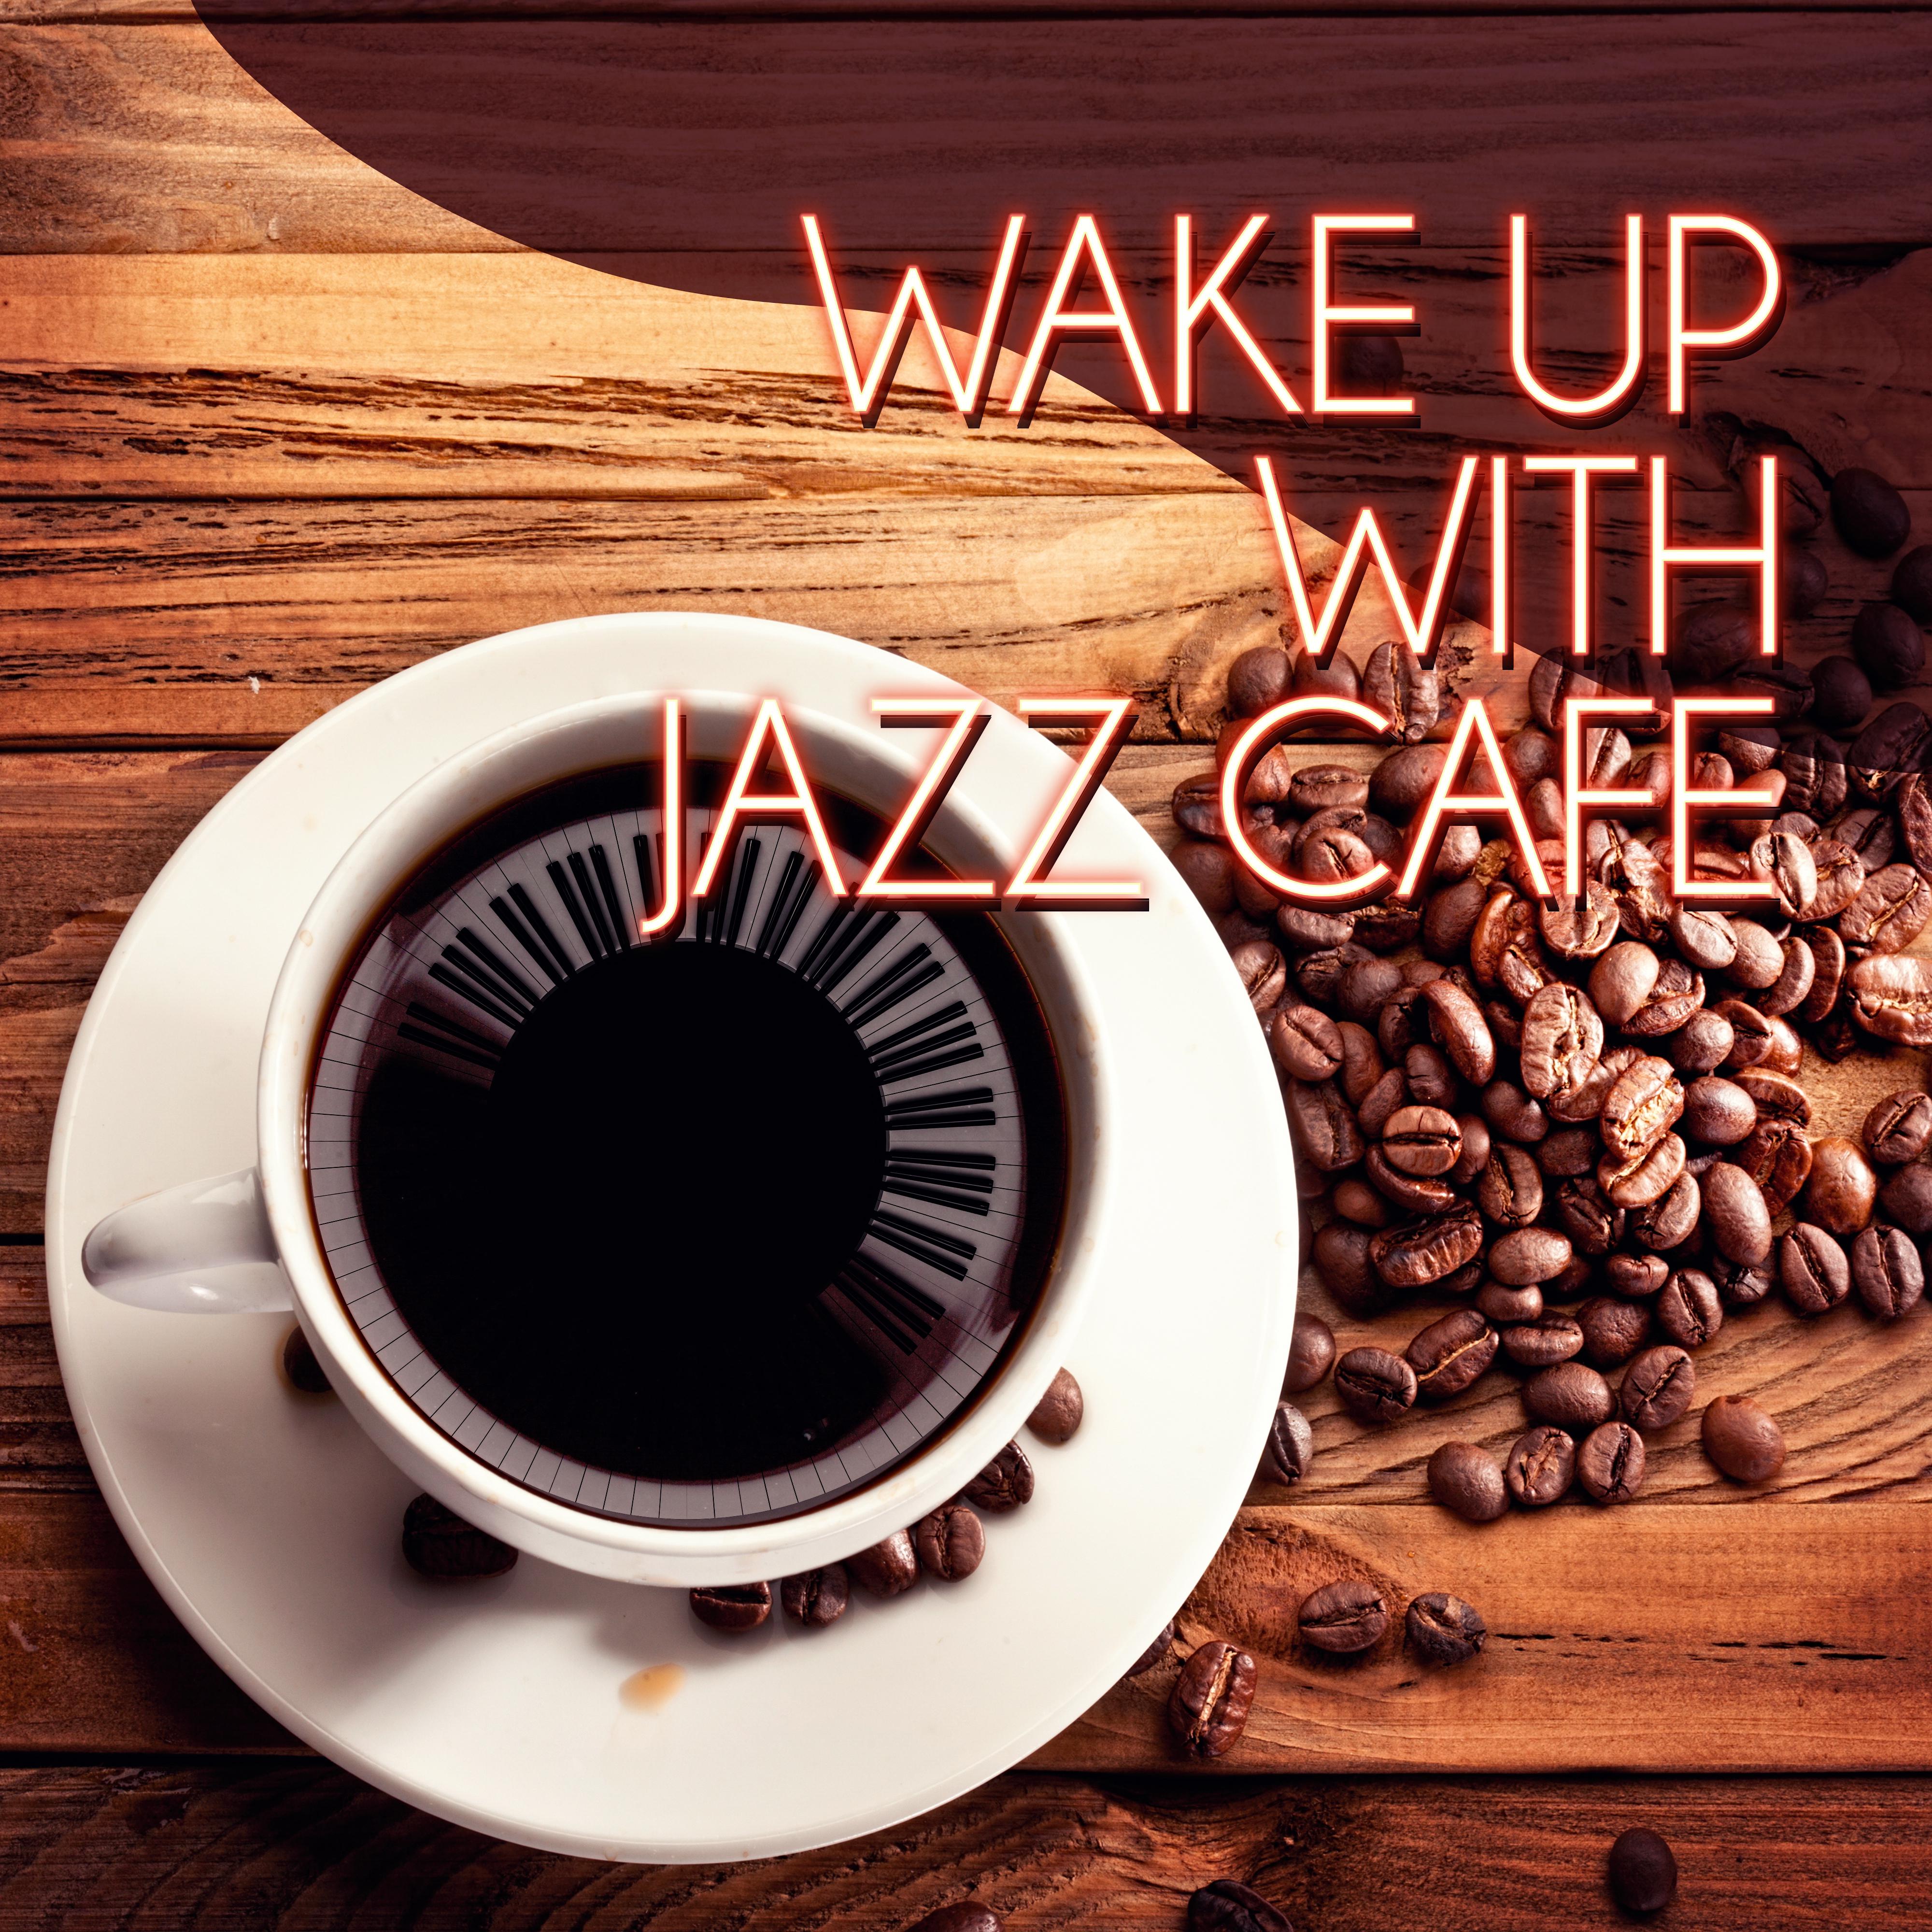 Wake Up with Jazz Cafe - Best of Smooth Jazz, Finest Chill Out & Lounge Music, Background Music and Relaxation Sounds, Piano Bar